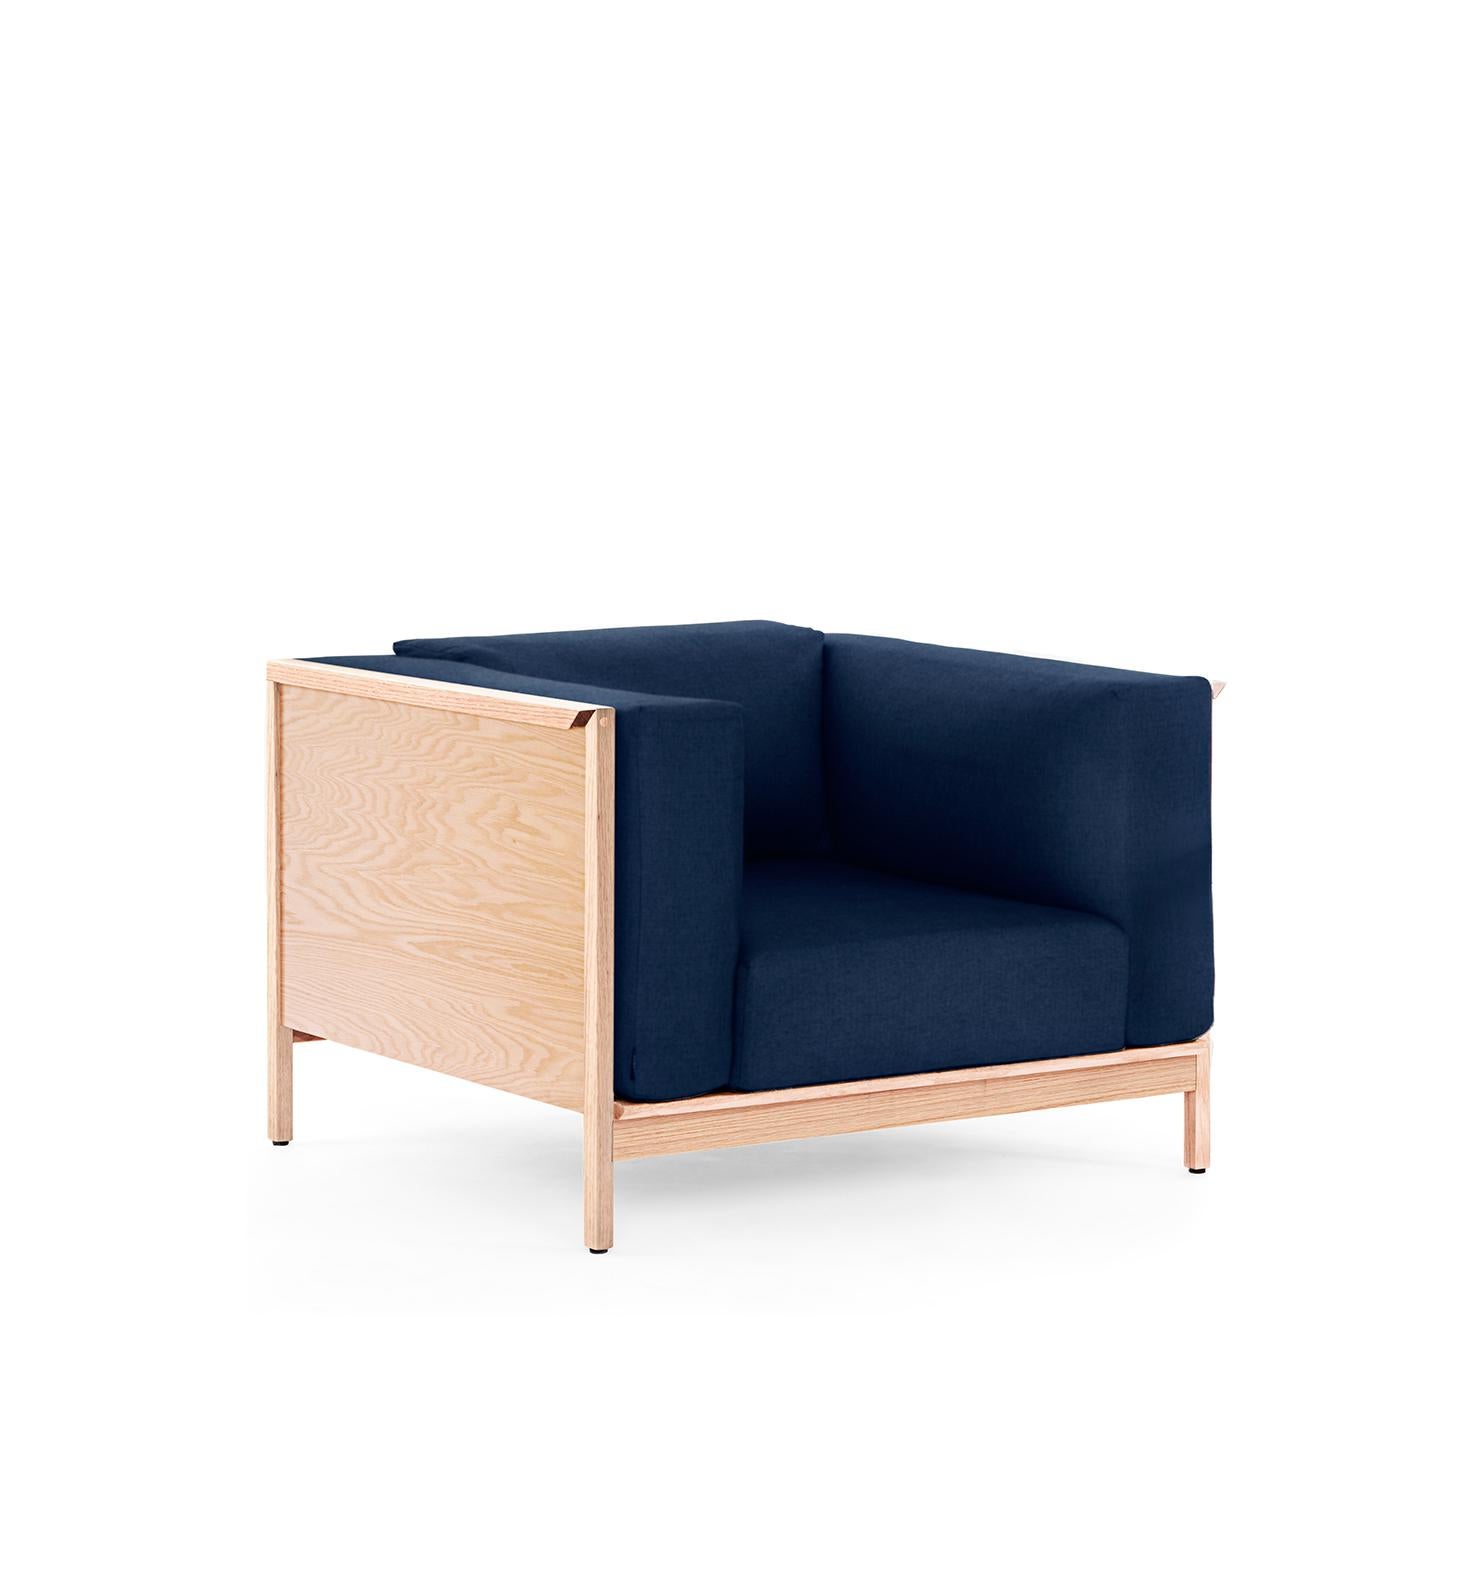 Individual Confort, Mexican Contemporary Armchair by Emiliano Molina for Cuchara For Sale 1